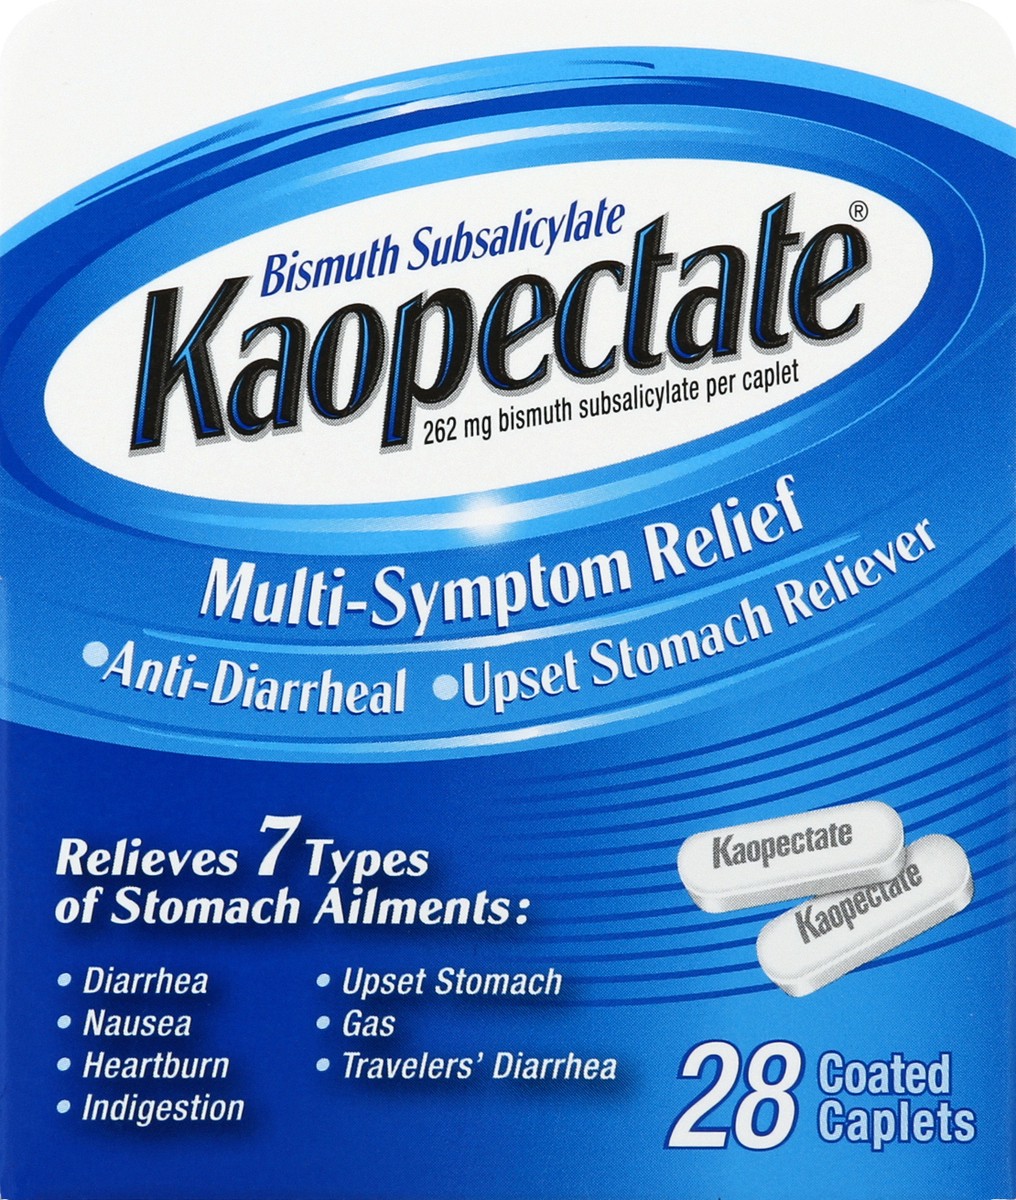 slide 4 of 7, Kaopectate Anti-Diarrheal/Upset Stomach Reliever 262 mg Multi-Symptom Relief Coated Caplets, 28 ct